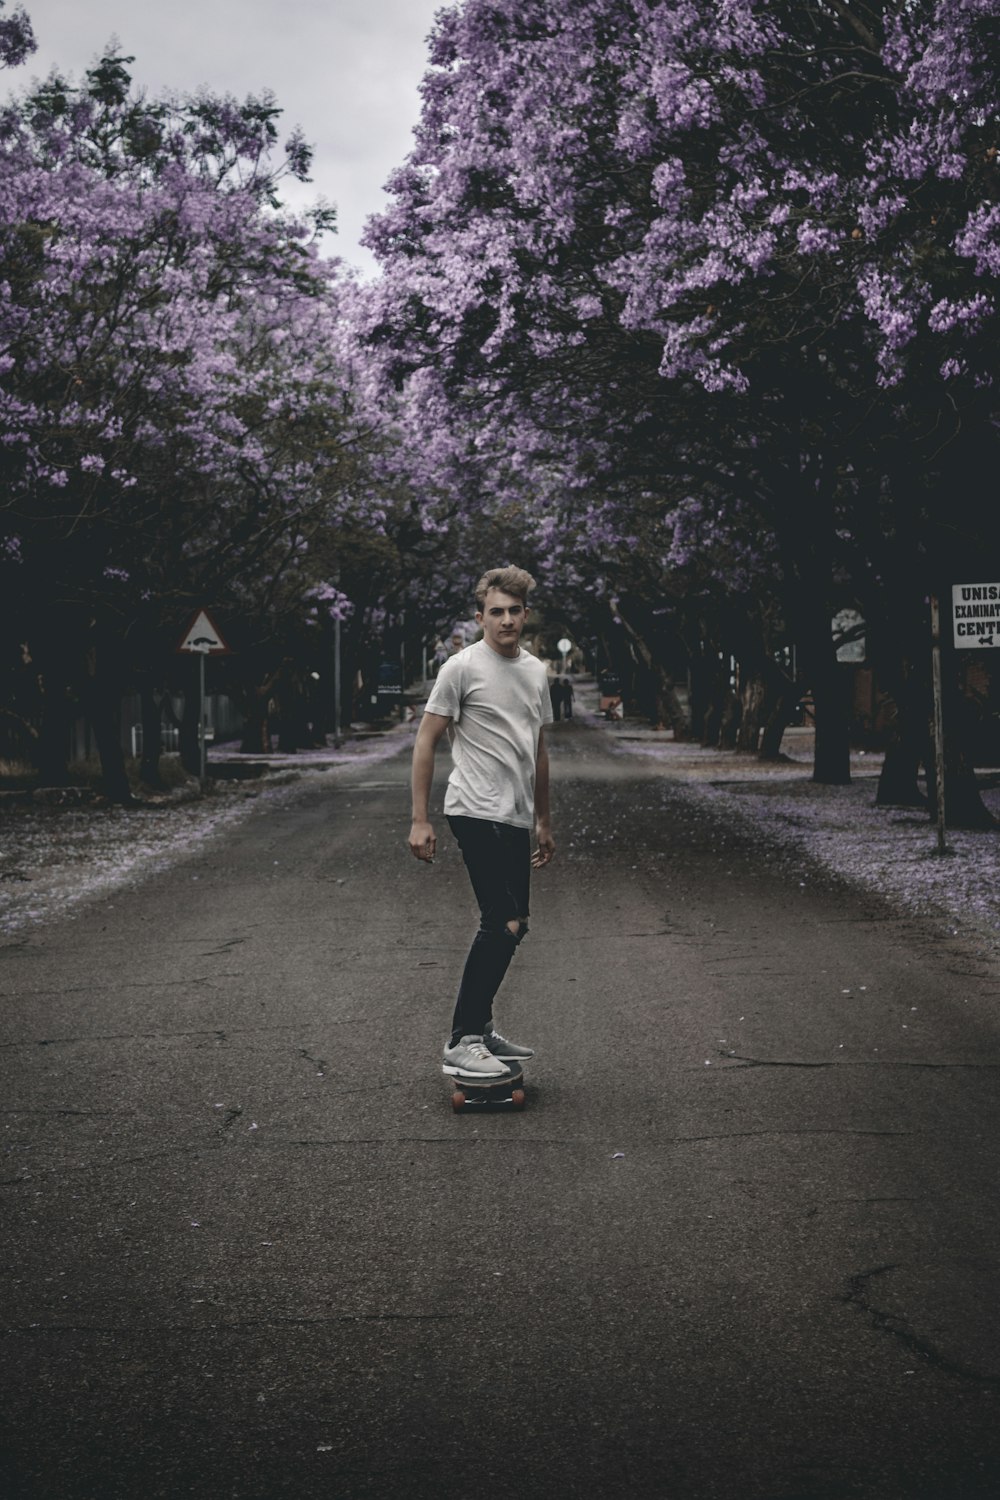 person skating on gray concrete top road near purple leaf trees